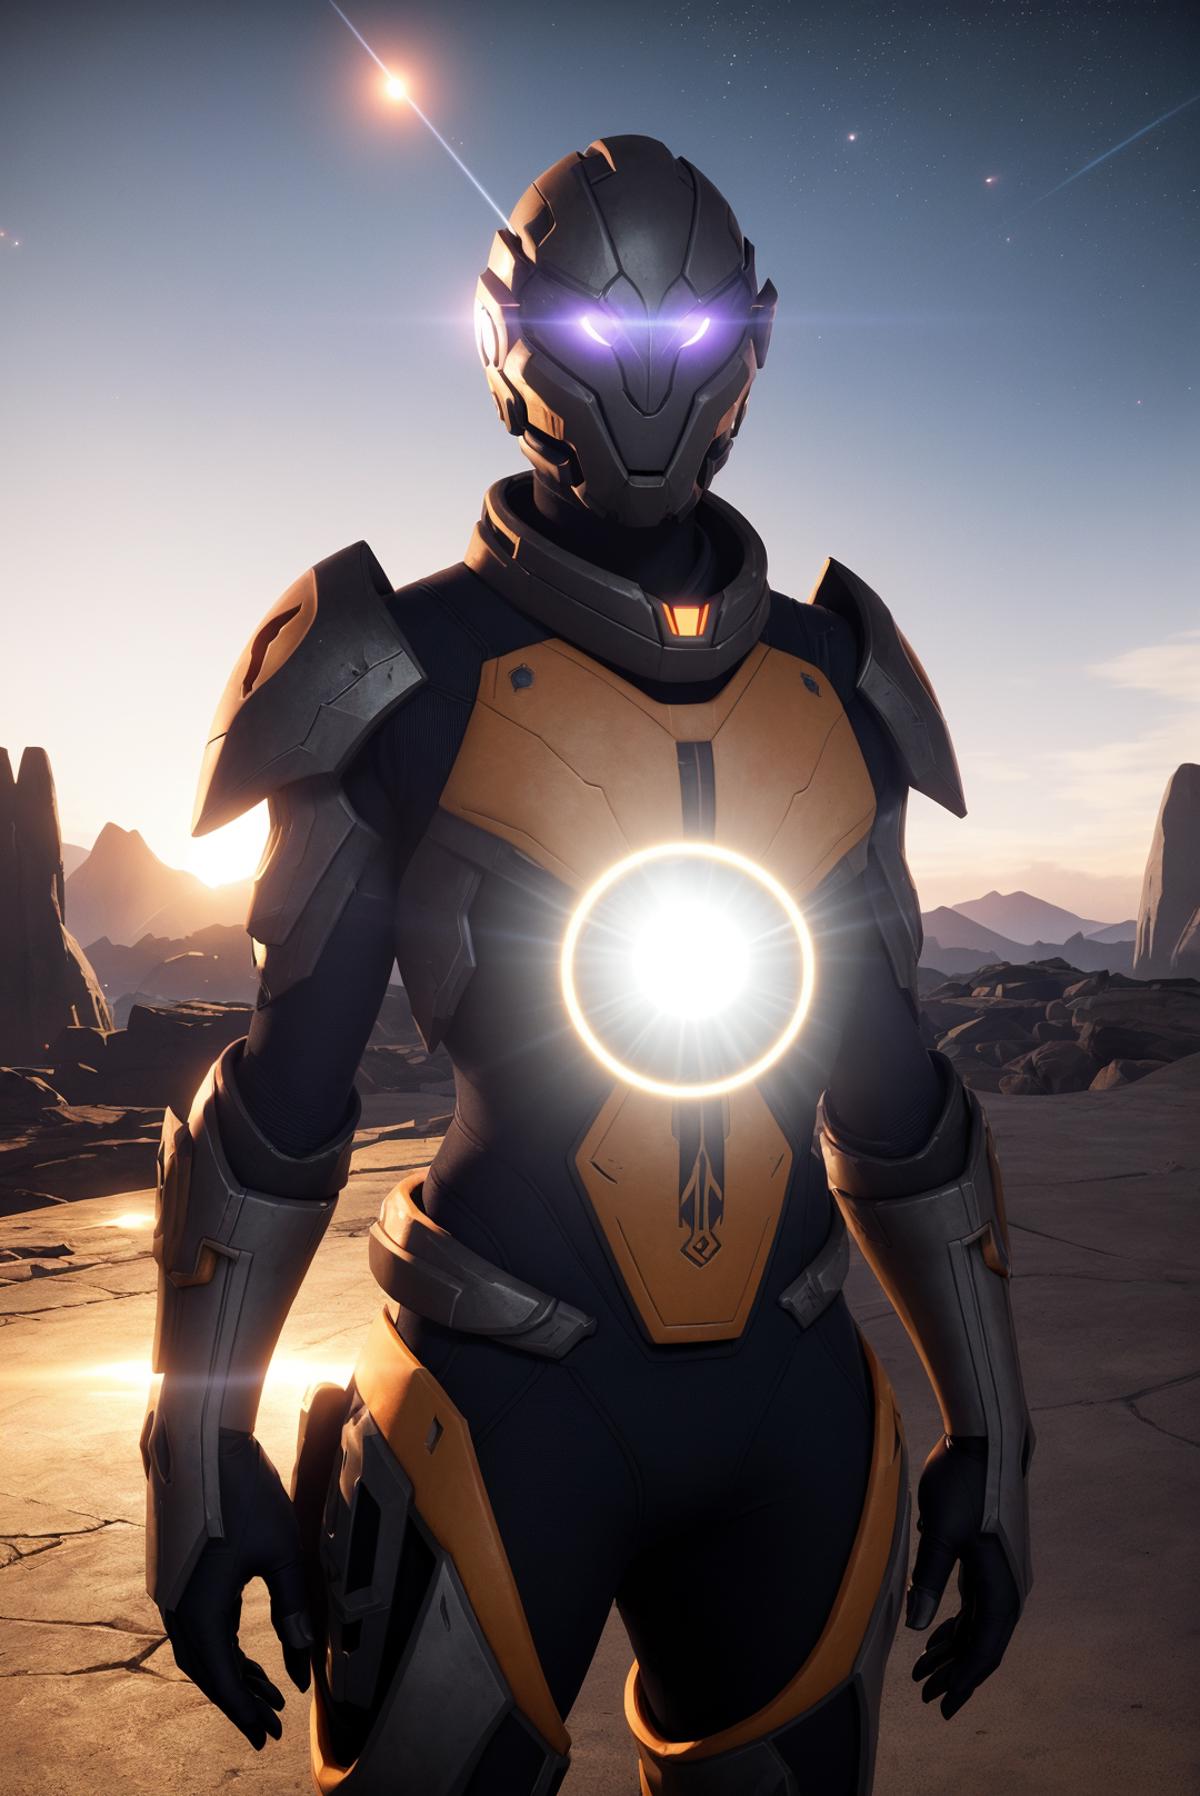 A digital illustration of a female robot with a yellow and black suit, wearing a helmet with purple eyes and a glowing yellow circle on her chest. She is standing in a desert environment with mountains in the background.